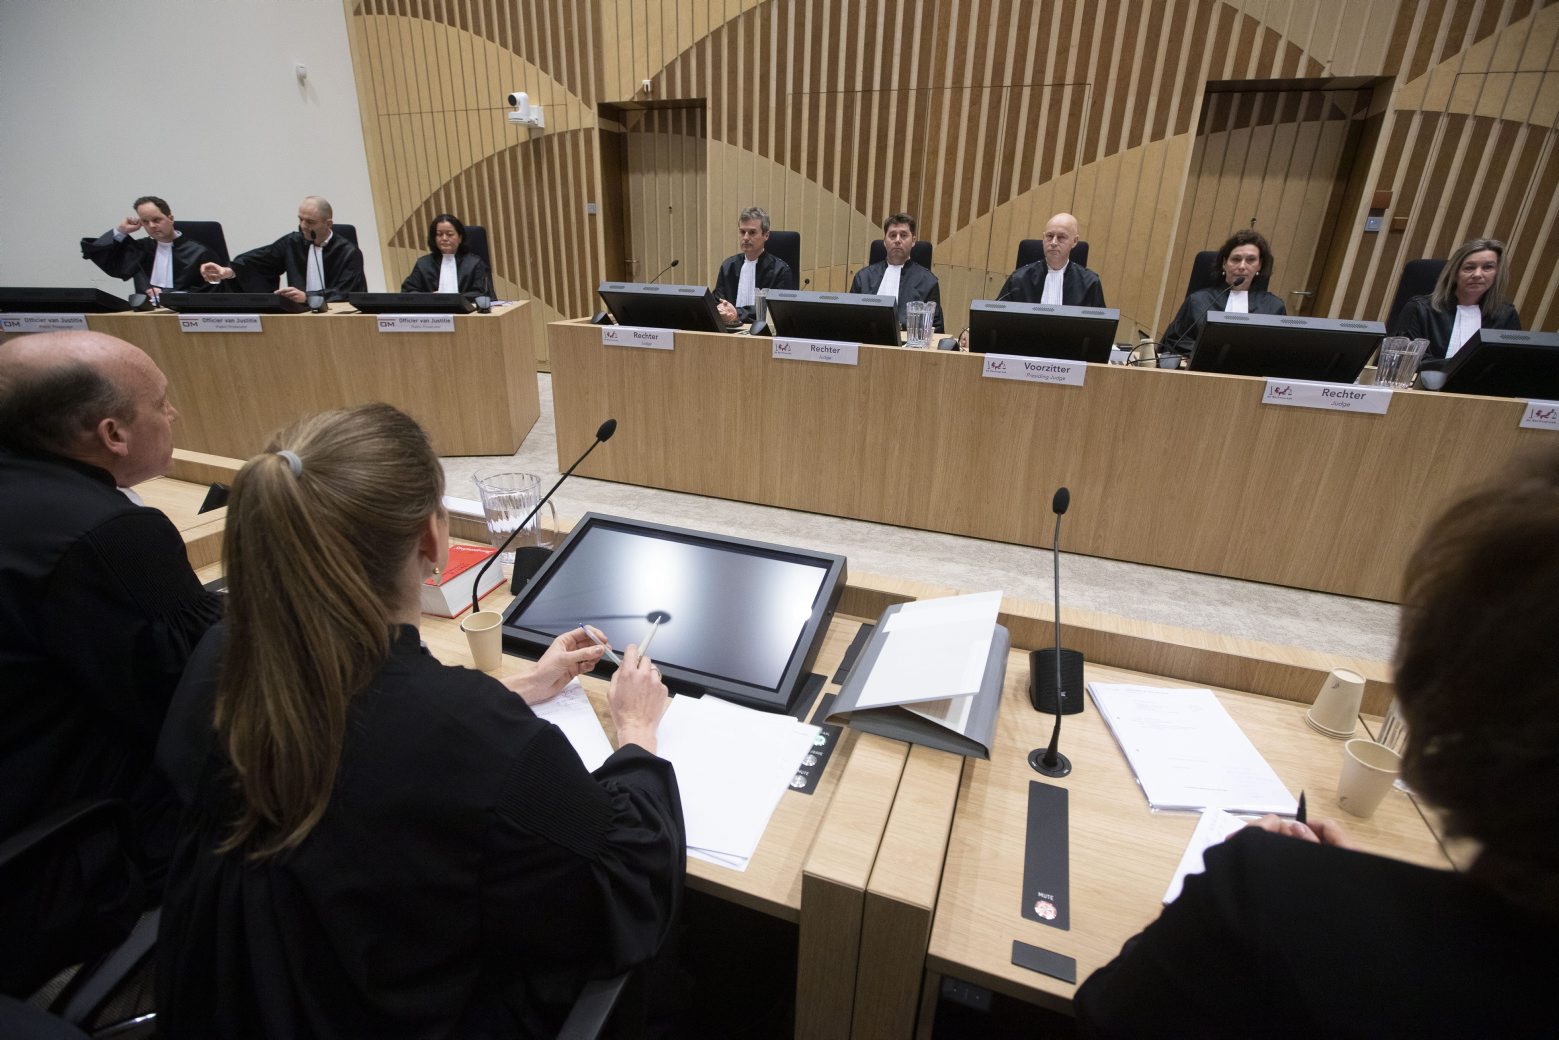 Lawyers Boudewijn van Eijck, left, and Sabine ten Doesschate, second left, lawyers for one of the four accused, judges, rear right, and the public prosecution, rear left, are seen at the start of the trial of four men charged with murder over the downing of Malaysia Airlines flight 17, at Schiphol airport, near Amsterdam, Netherlands, Monday, March 9, 2020. A missile fired from territory controlled by pro-Russian rebels in Ukraine in 2014, tore the MH17 passenger jet apart killing all 298 people on board. (AP Photo/Peter Dejong) Netherlands Ukraine Plane